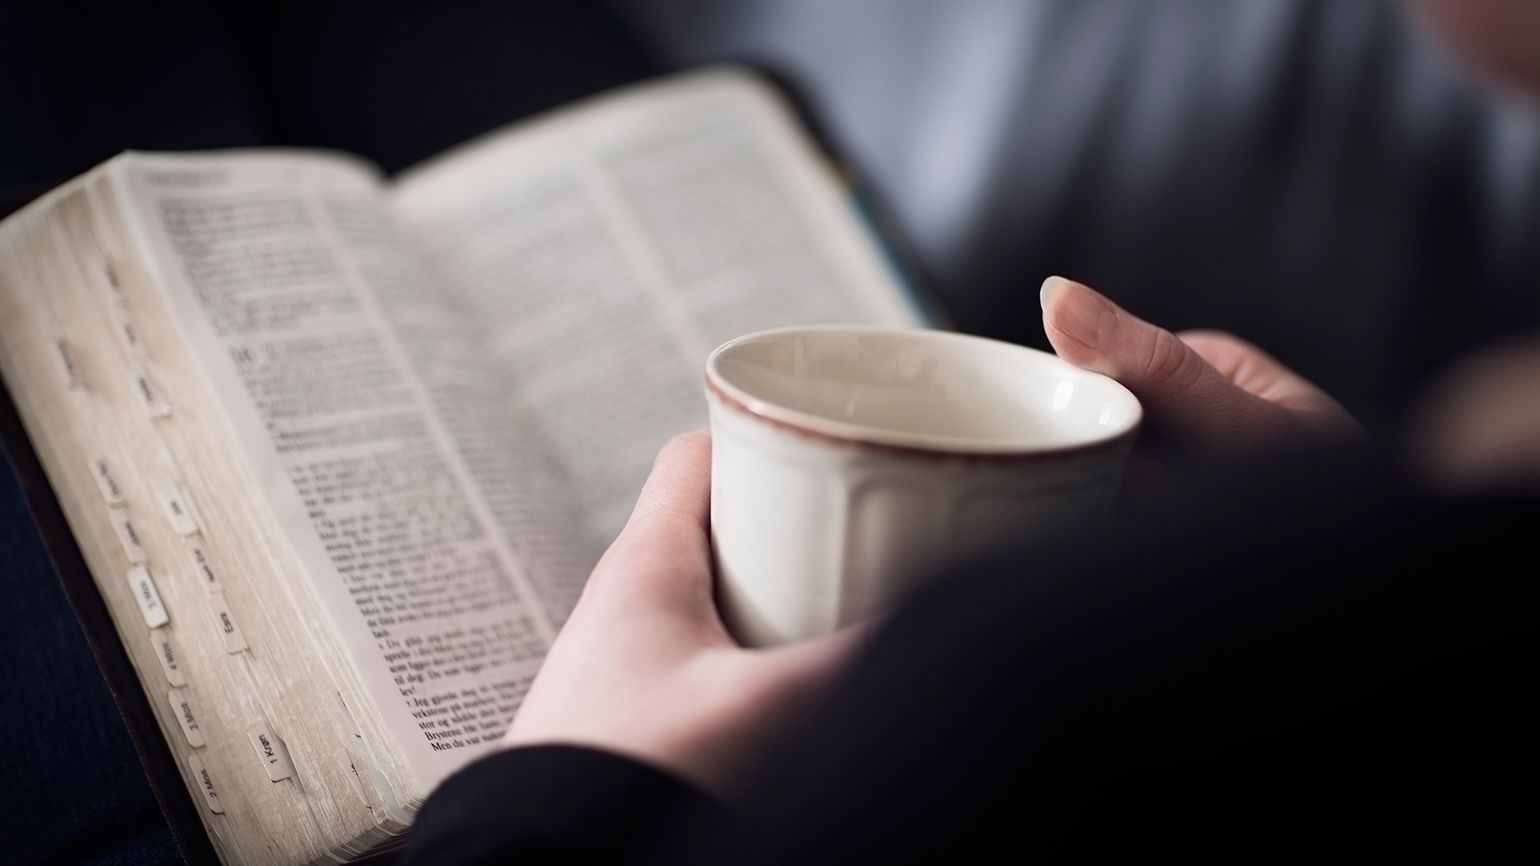 Woman's hands holding a coffee cup while she reads lent bible verses